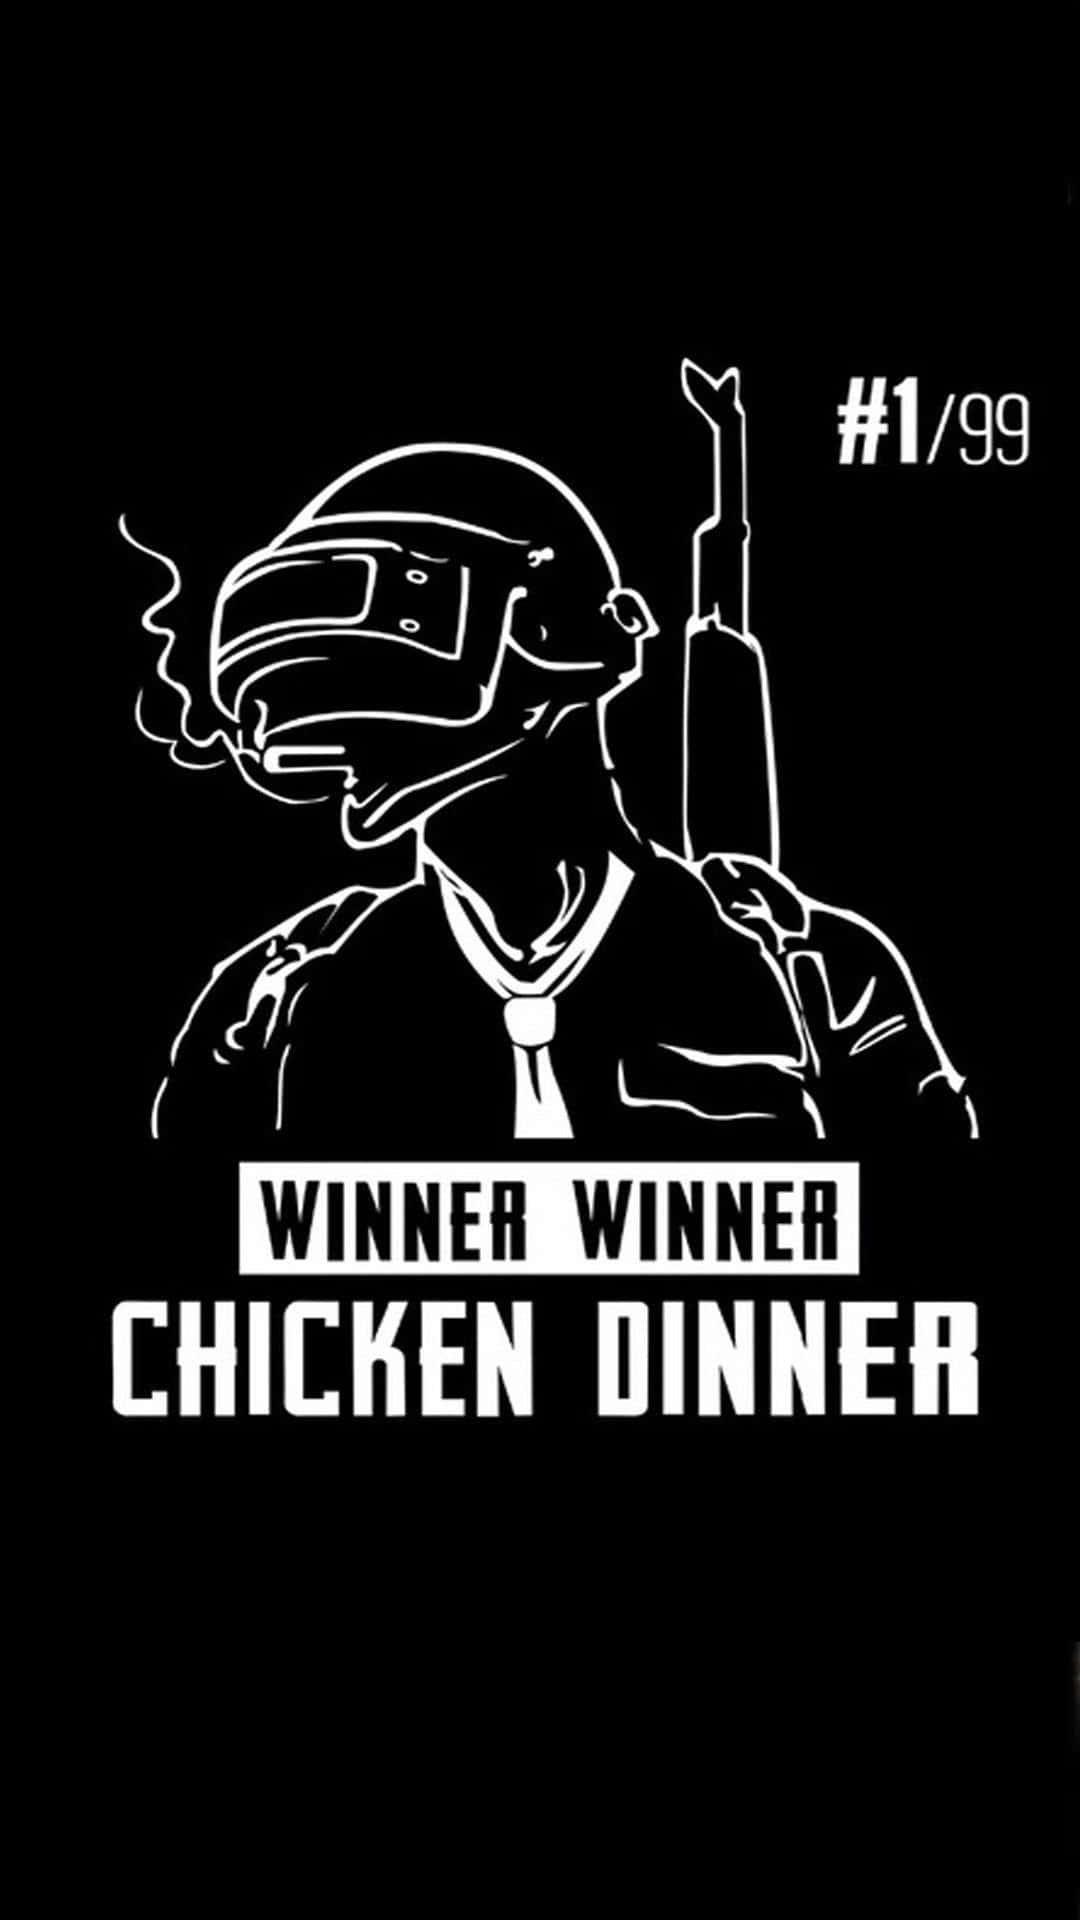 Get ready to battle it out with the official logo of PUBG